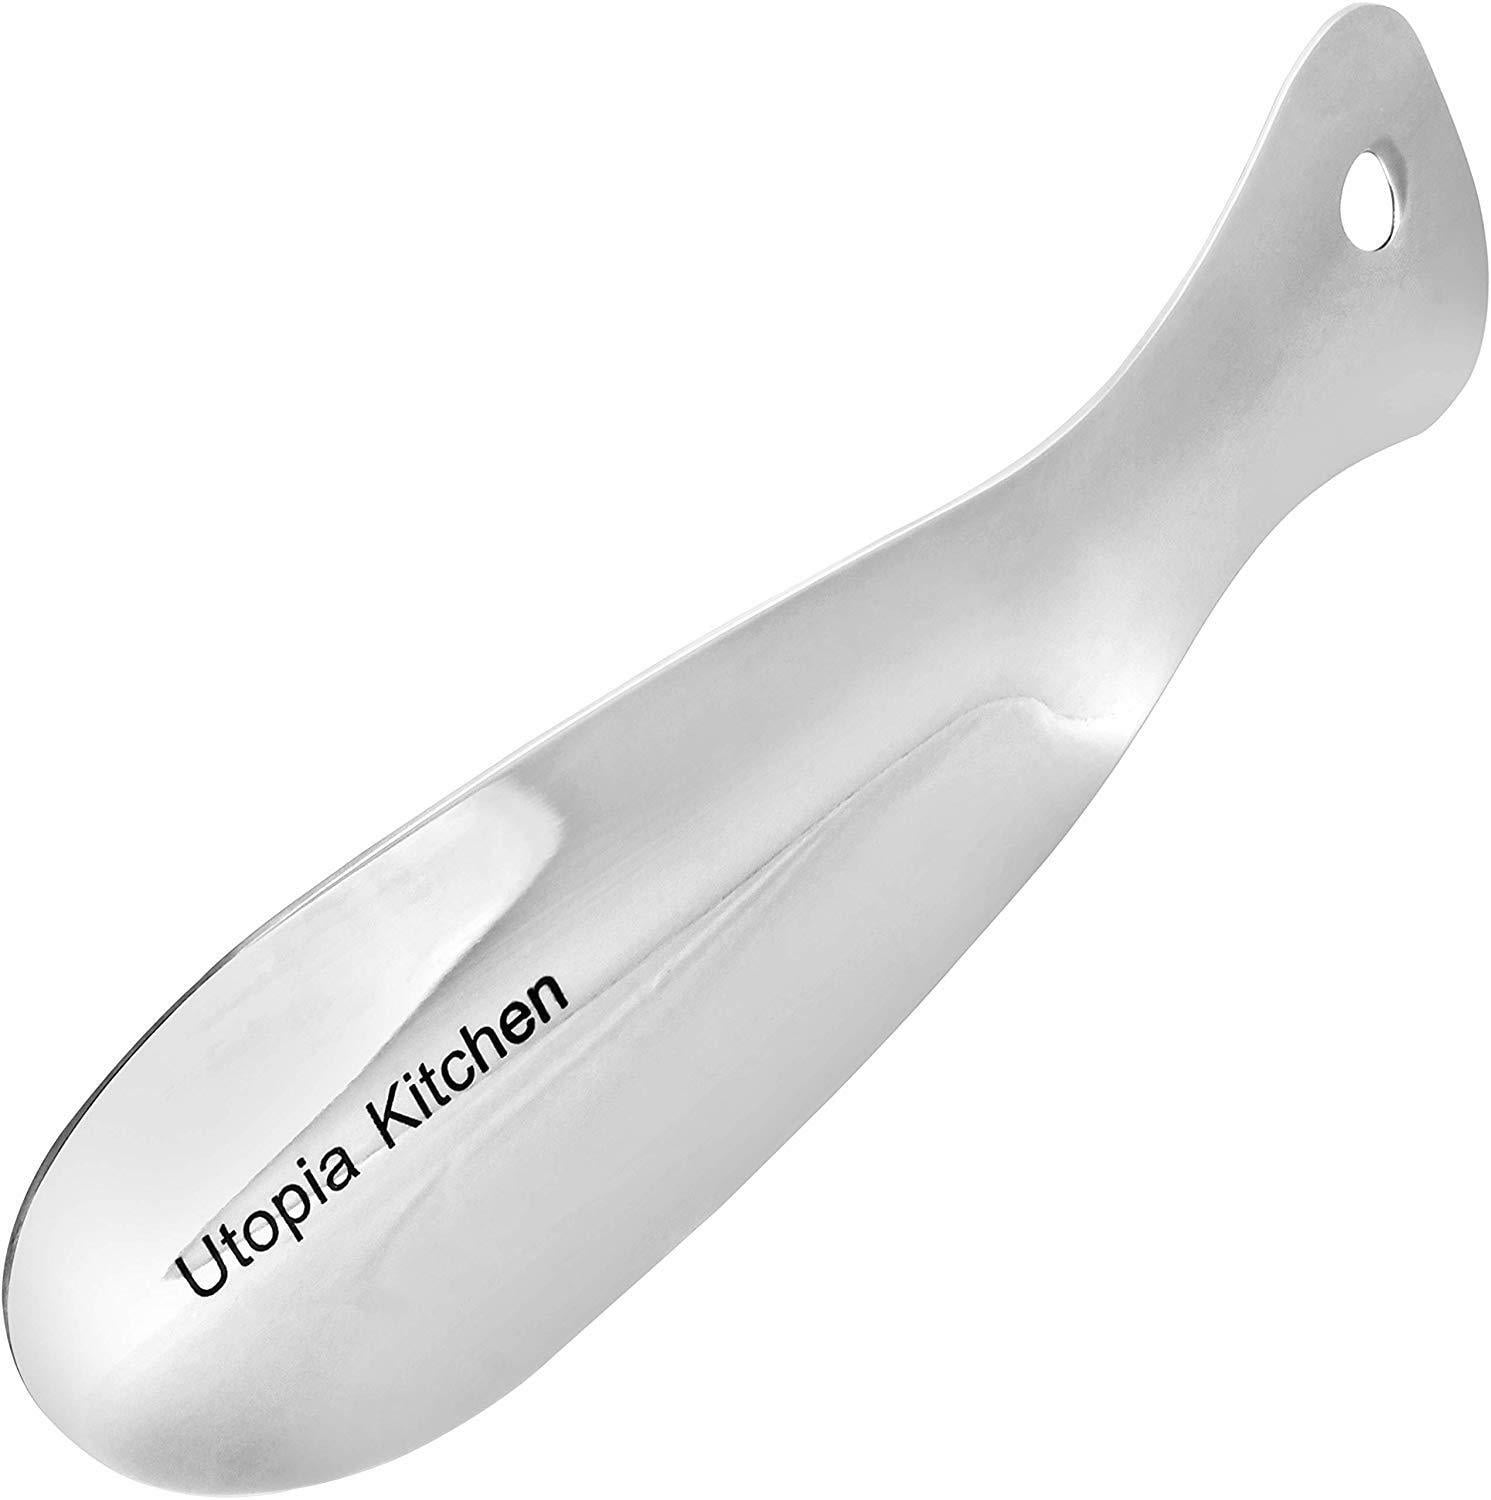 Metal Shoe Horn 7.5 inch Shoe-horn Double Sided Stainless Steel by Utopia Home 